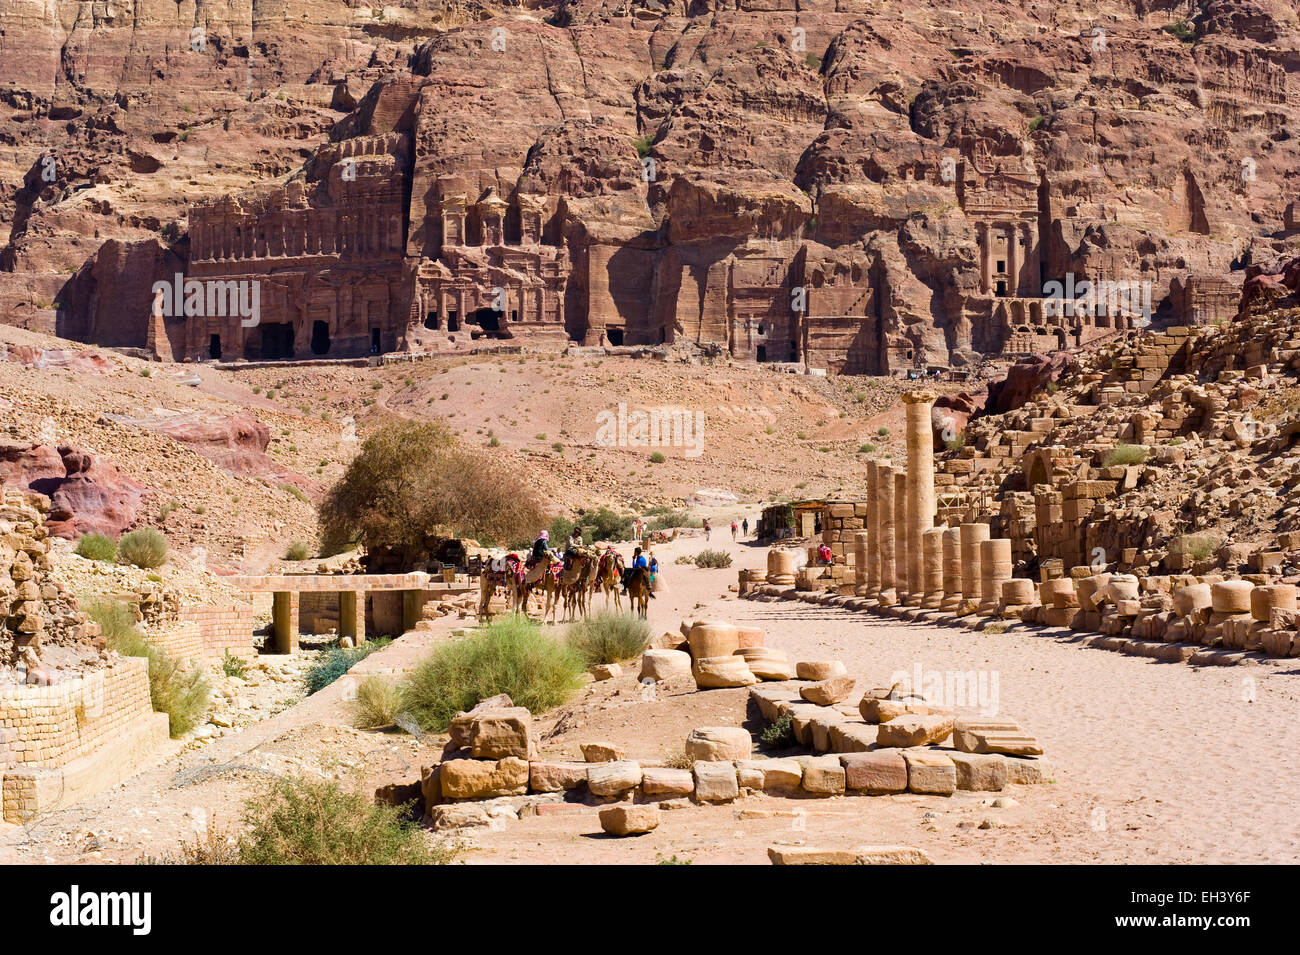 PETRA,  JORDAN - OCT 12, 2014: Roman pillars on colonnaded street, and the 'Royal tombs' on the background in the rocks in Petra Stock Photo